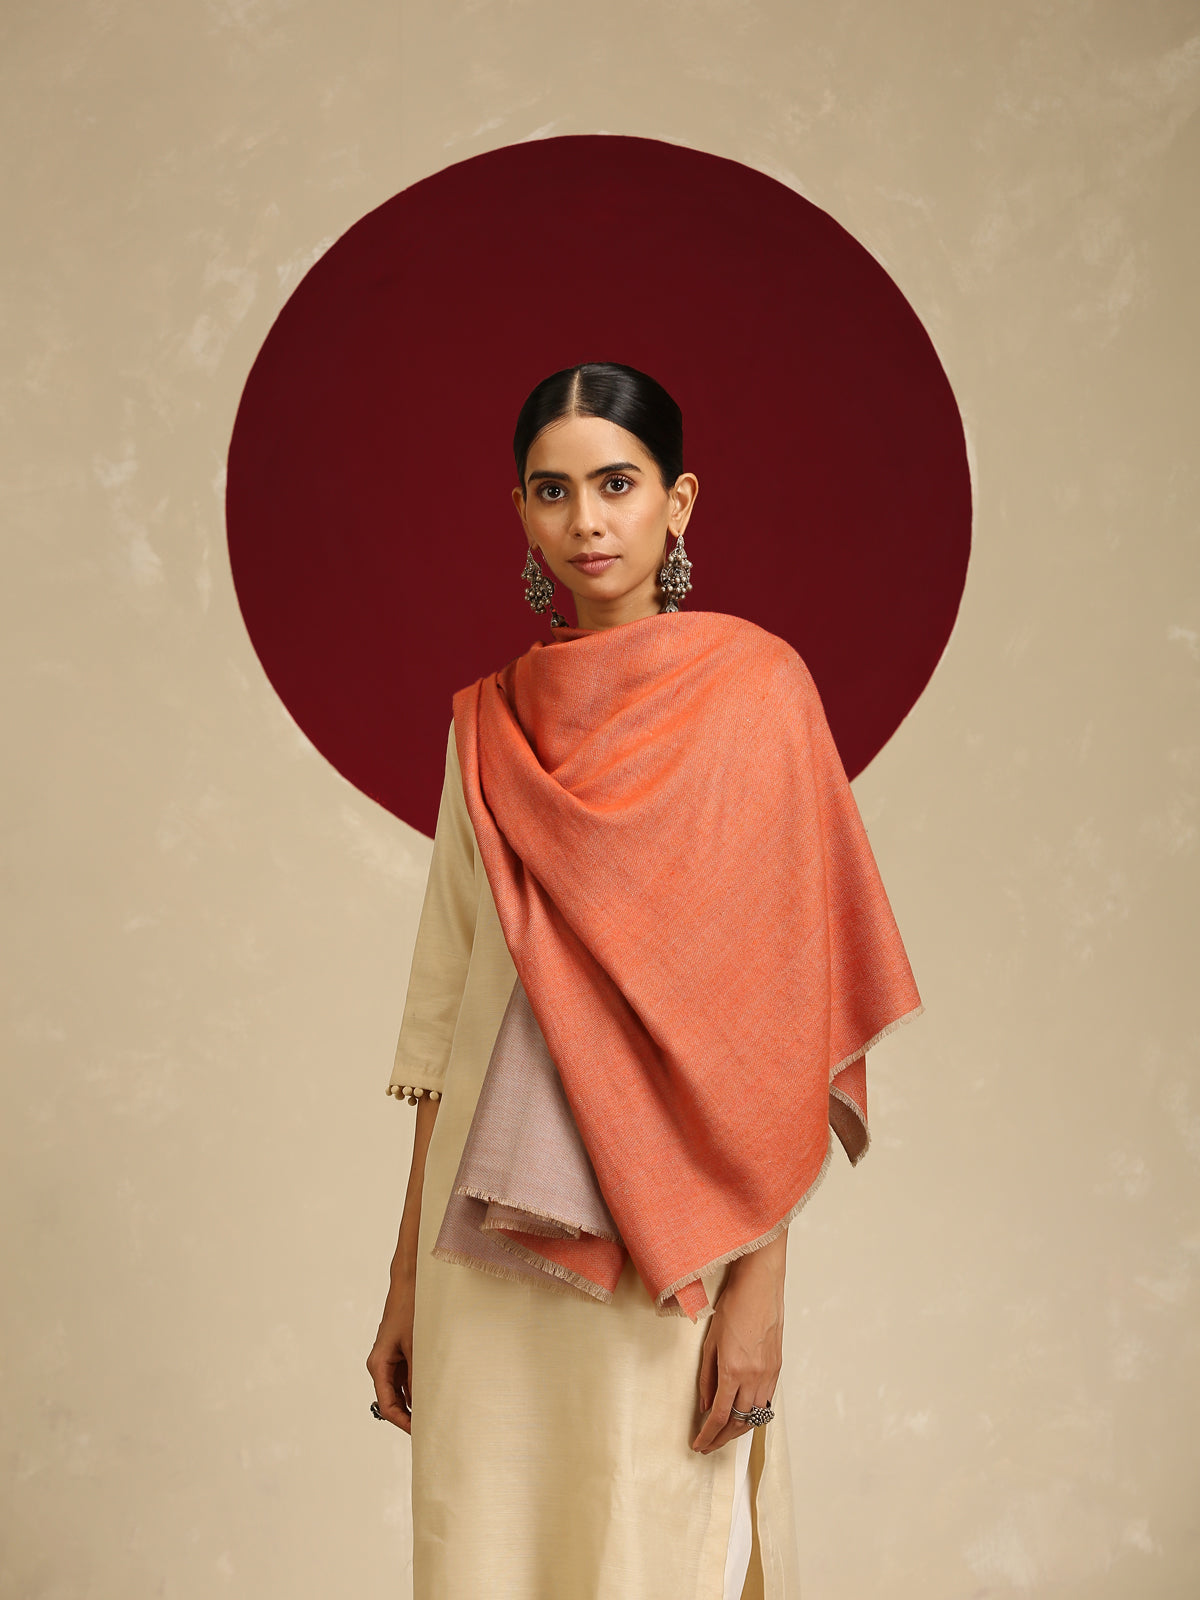 Model is wearing pashmina reversible shawl in orange with natural at the back.